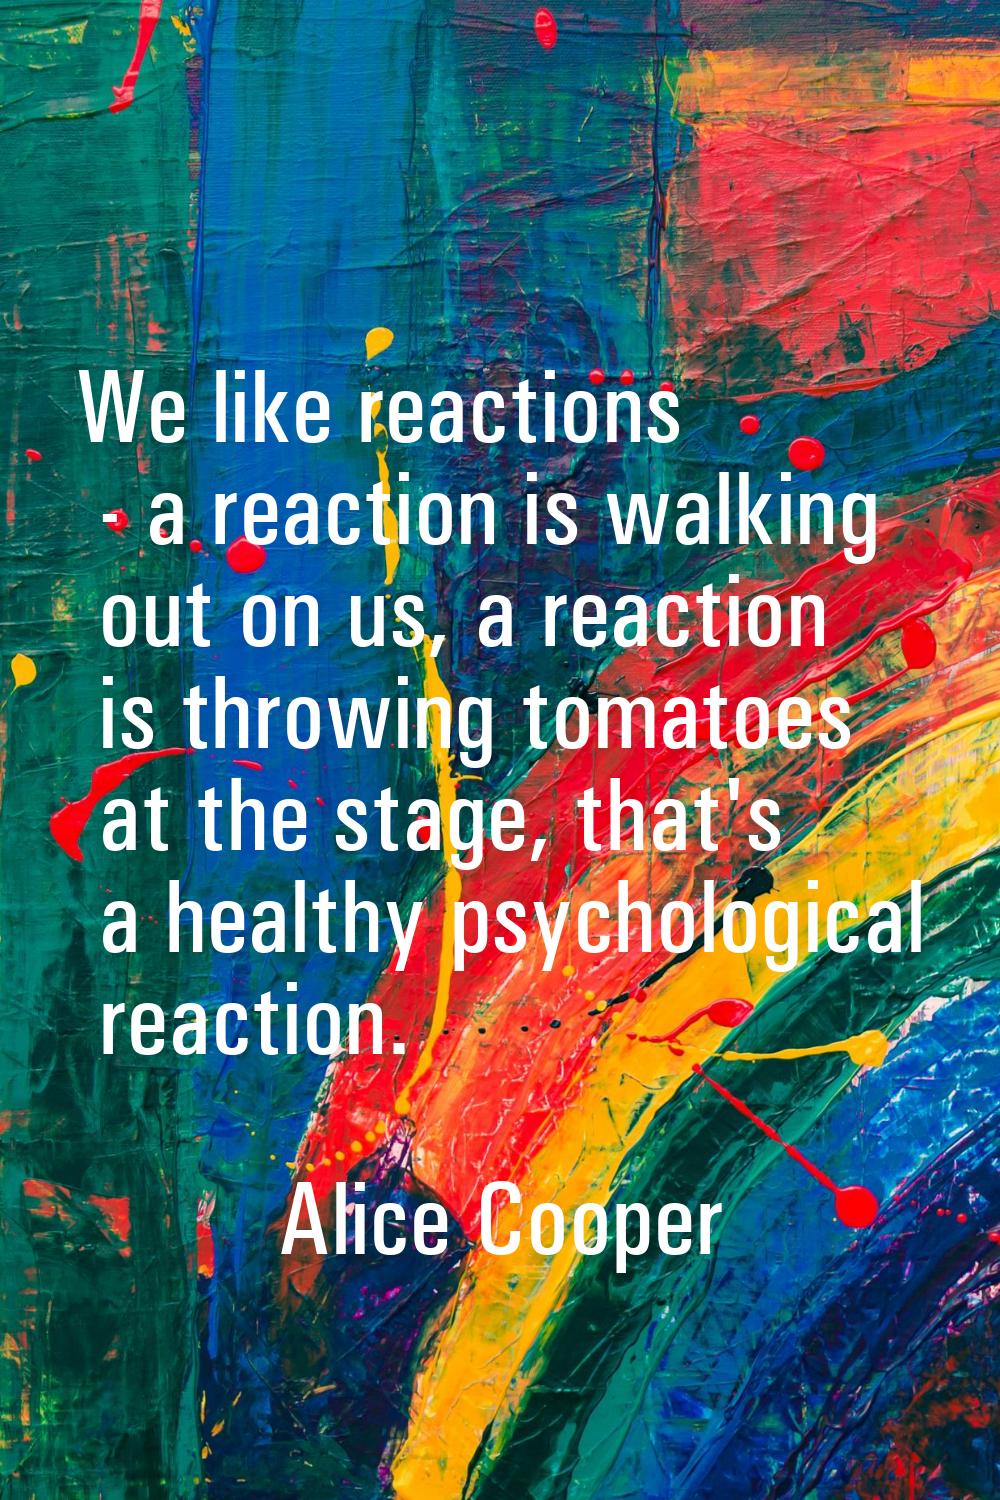 We like reactions - a reaction is walking out on us, a reaction is throwing tomatoes at the stage, 